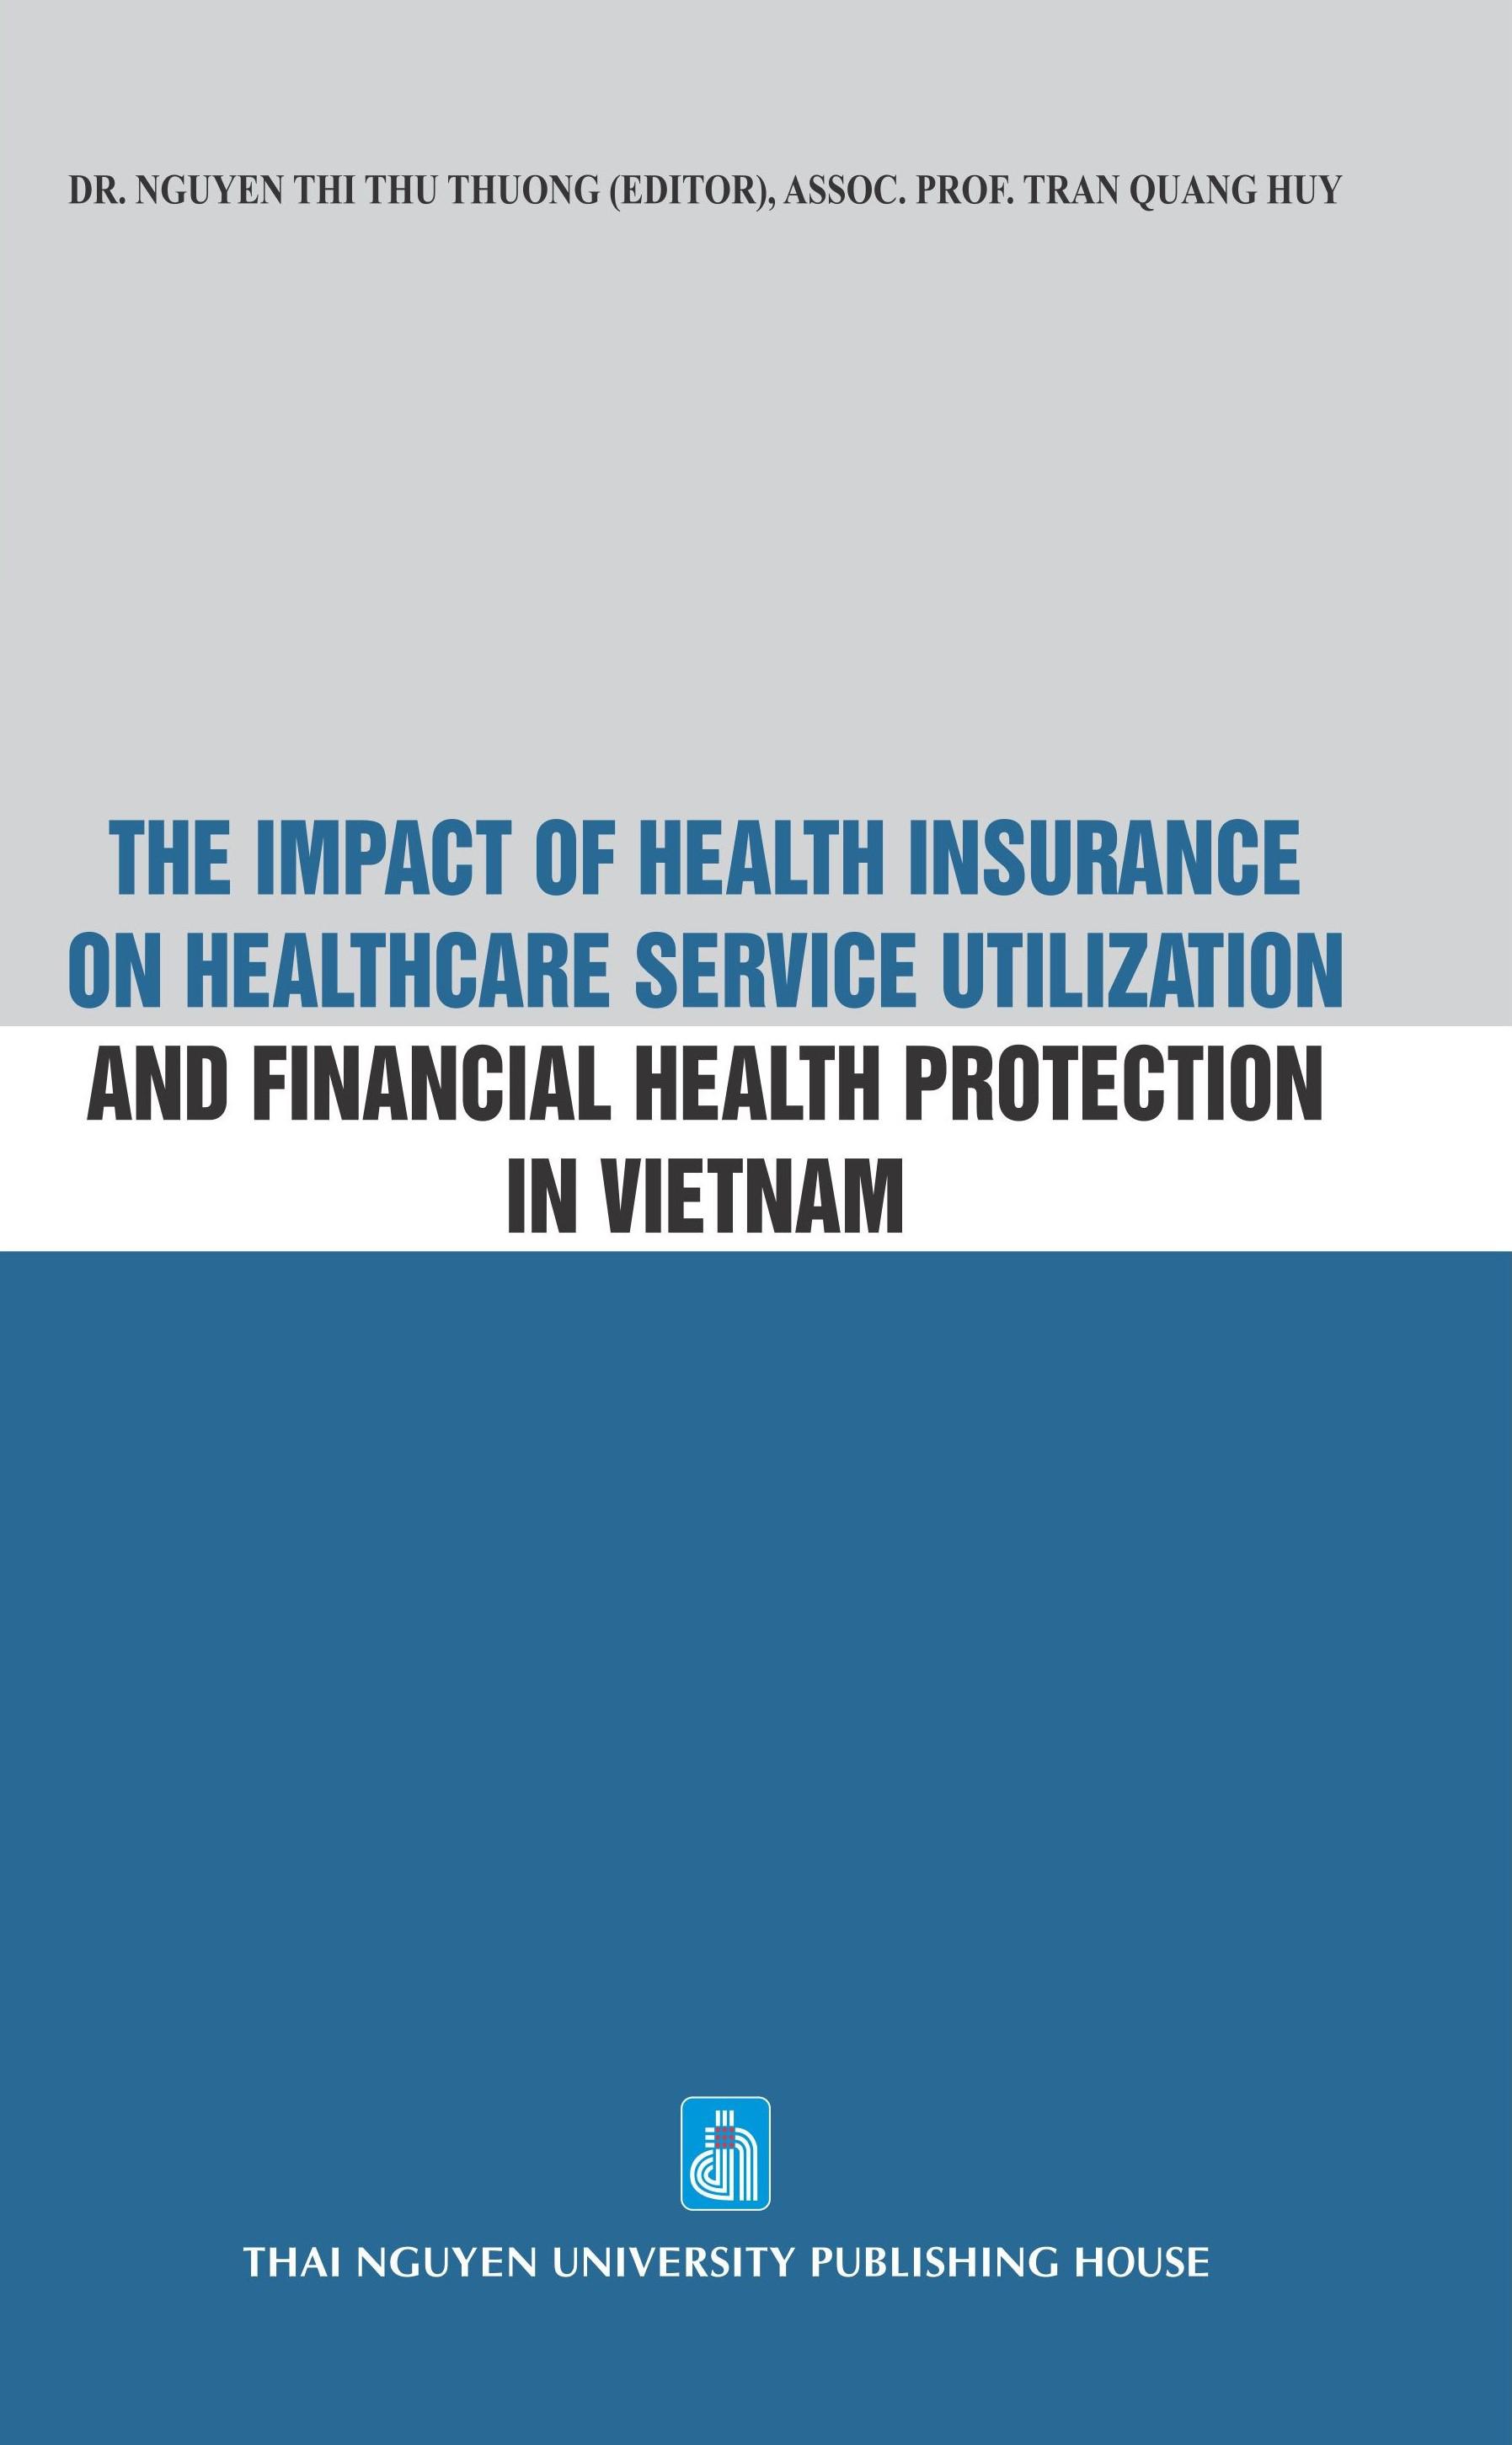 THE IMPACT OF HEALTH INSURANCE ON HEALTHCARE SERVICE UTILIZATION AND FINANCIAL HEALTH PROTECTION IN VIETNAM